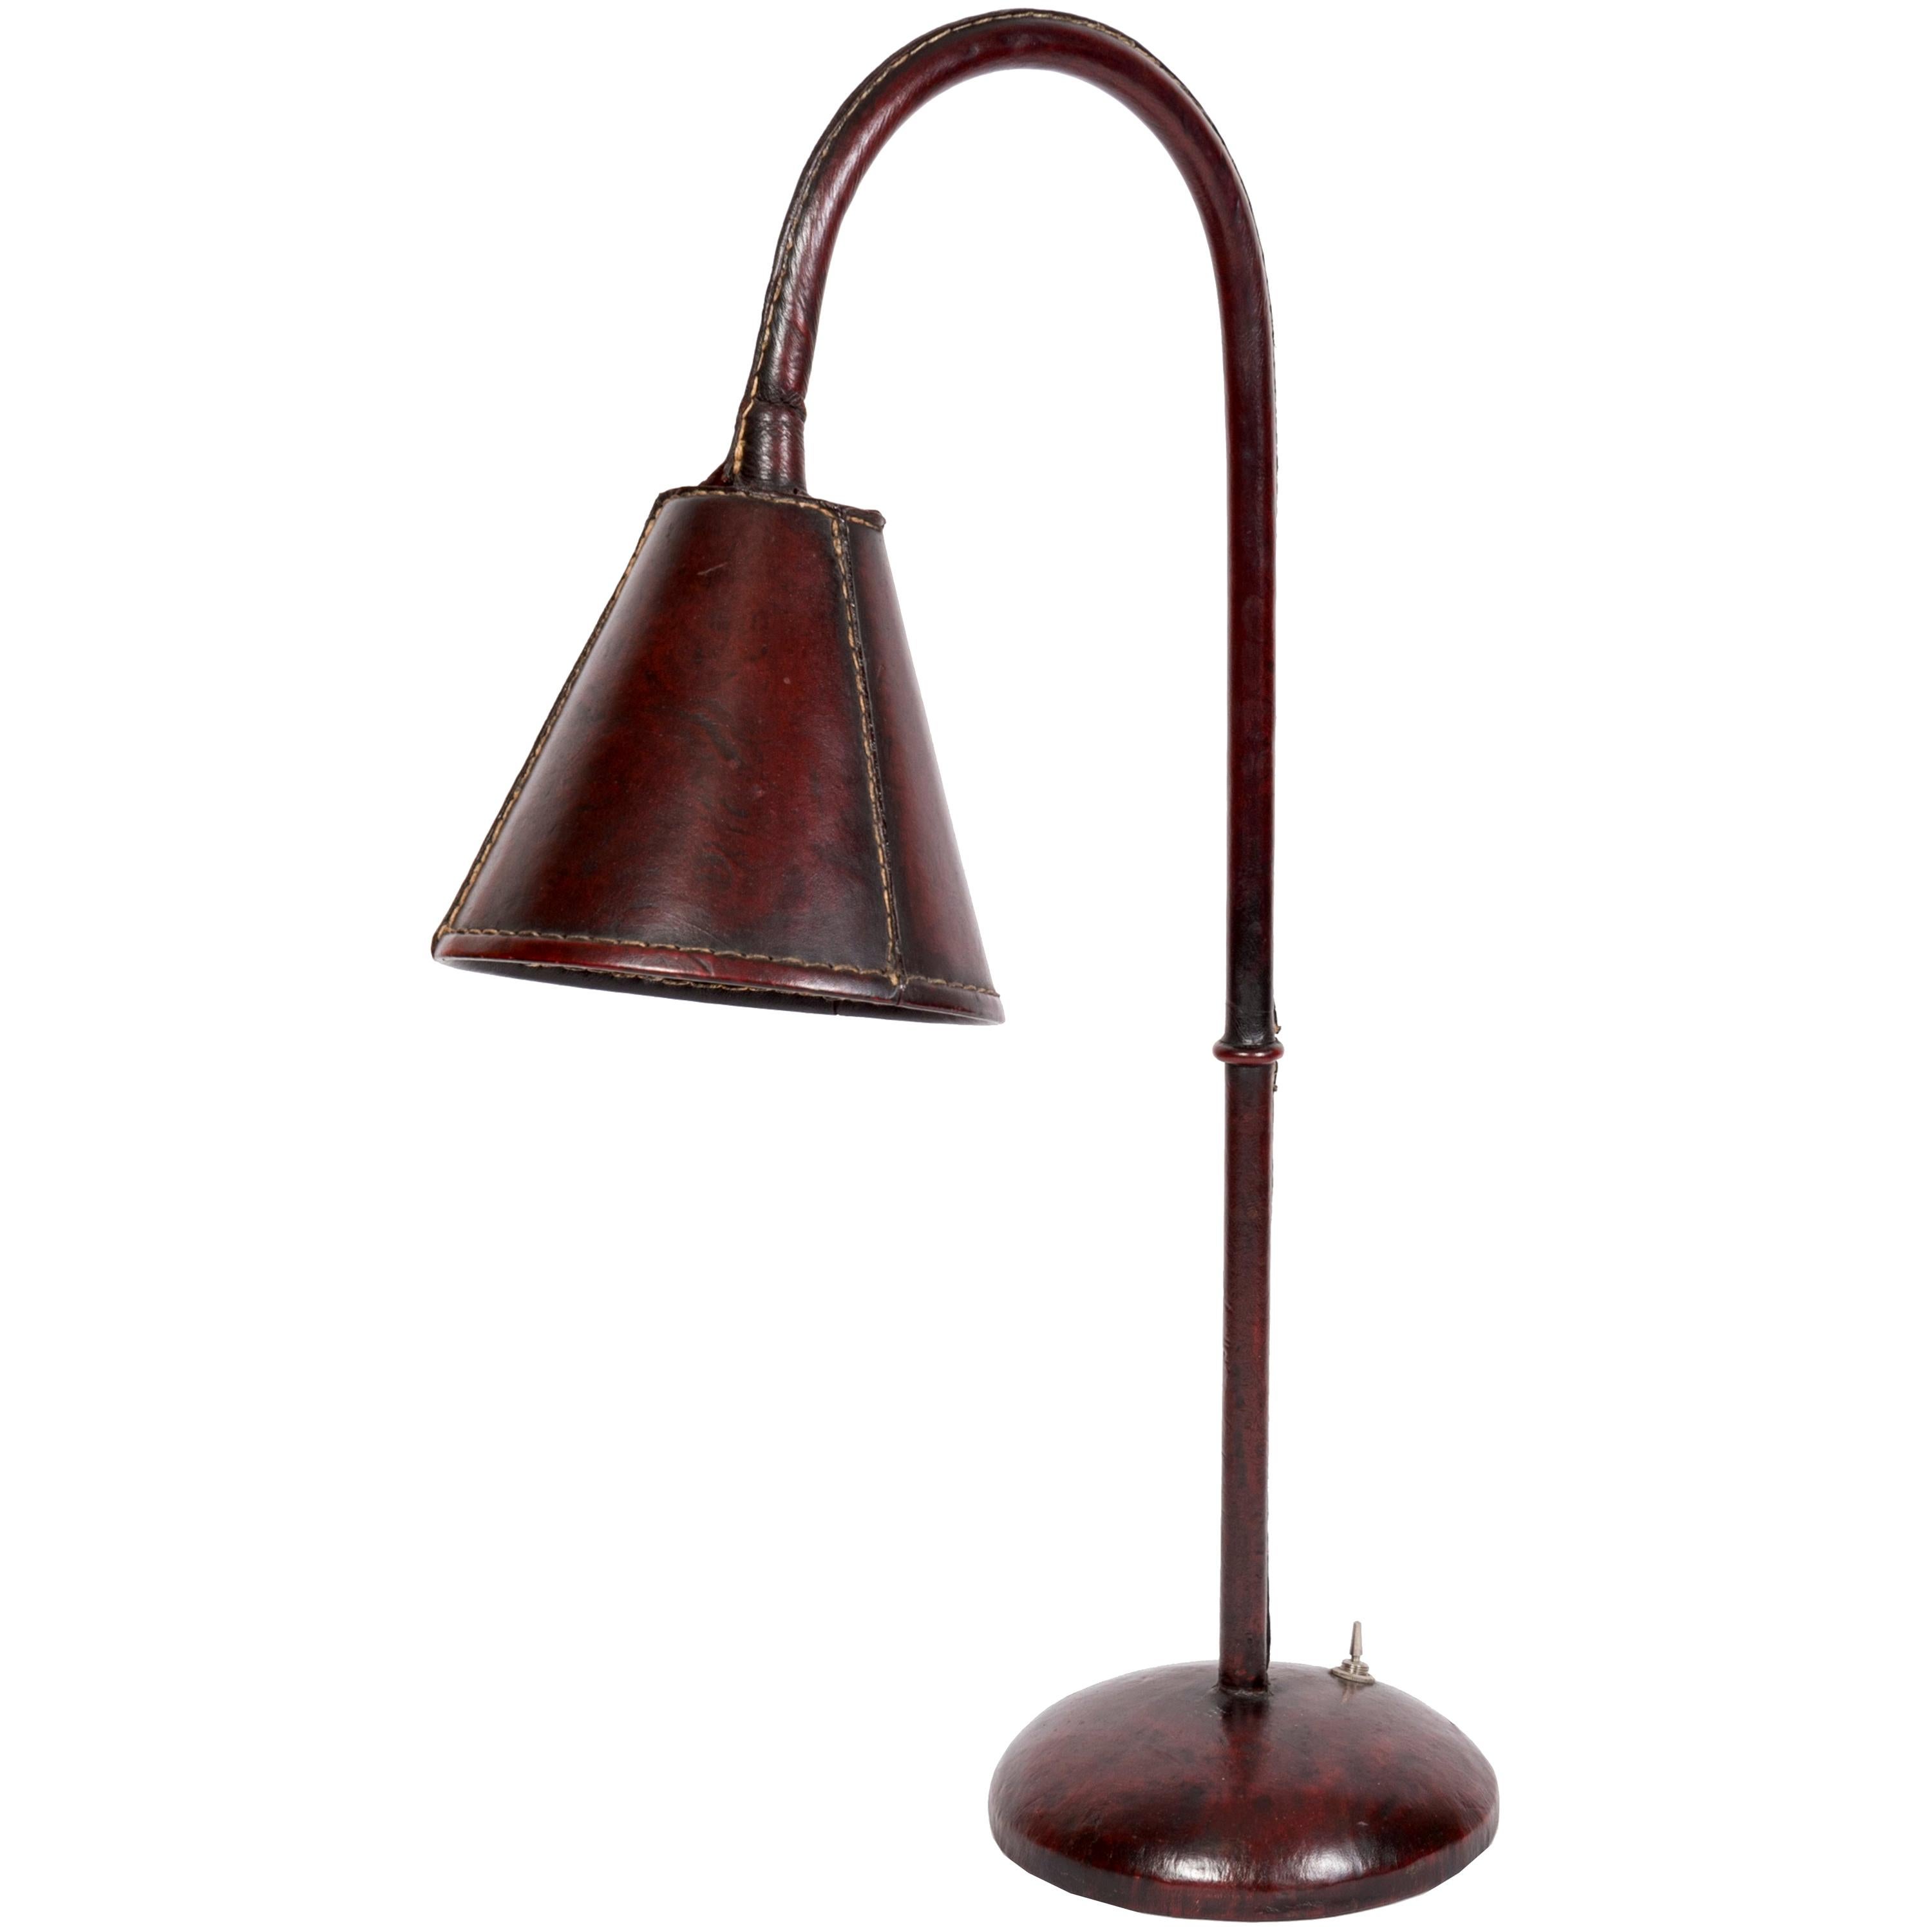 1950s Stitched Leather Table Lamp in Stitched Leather by Jacques Adnet